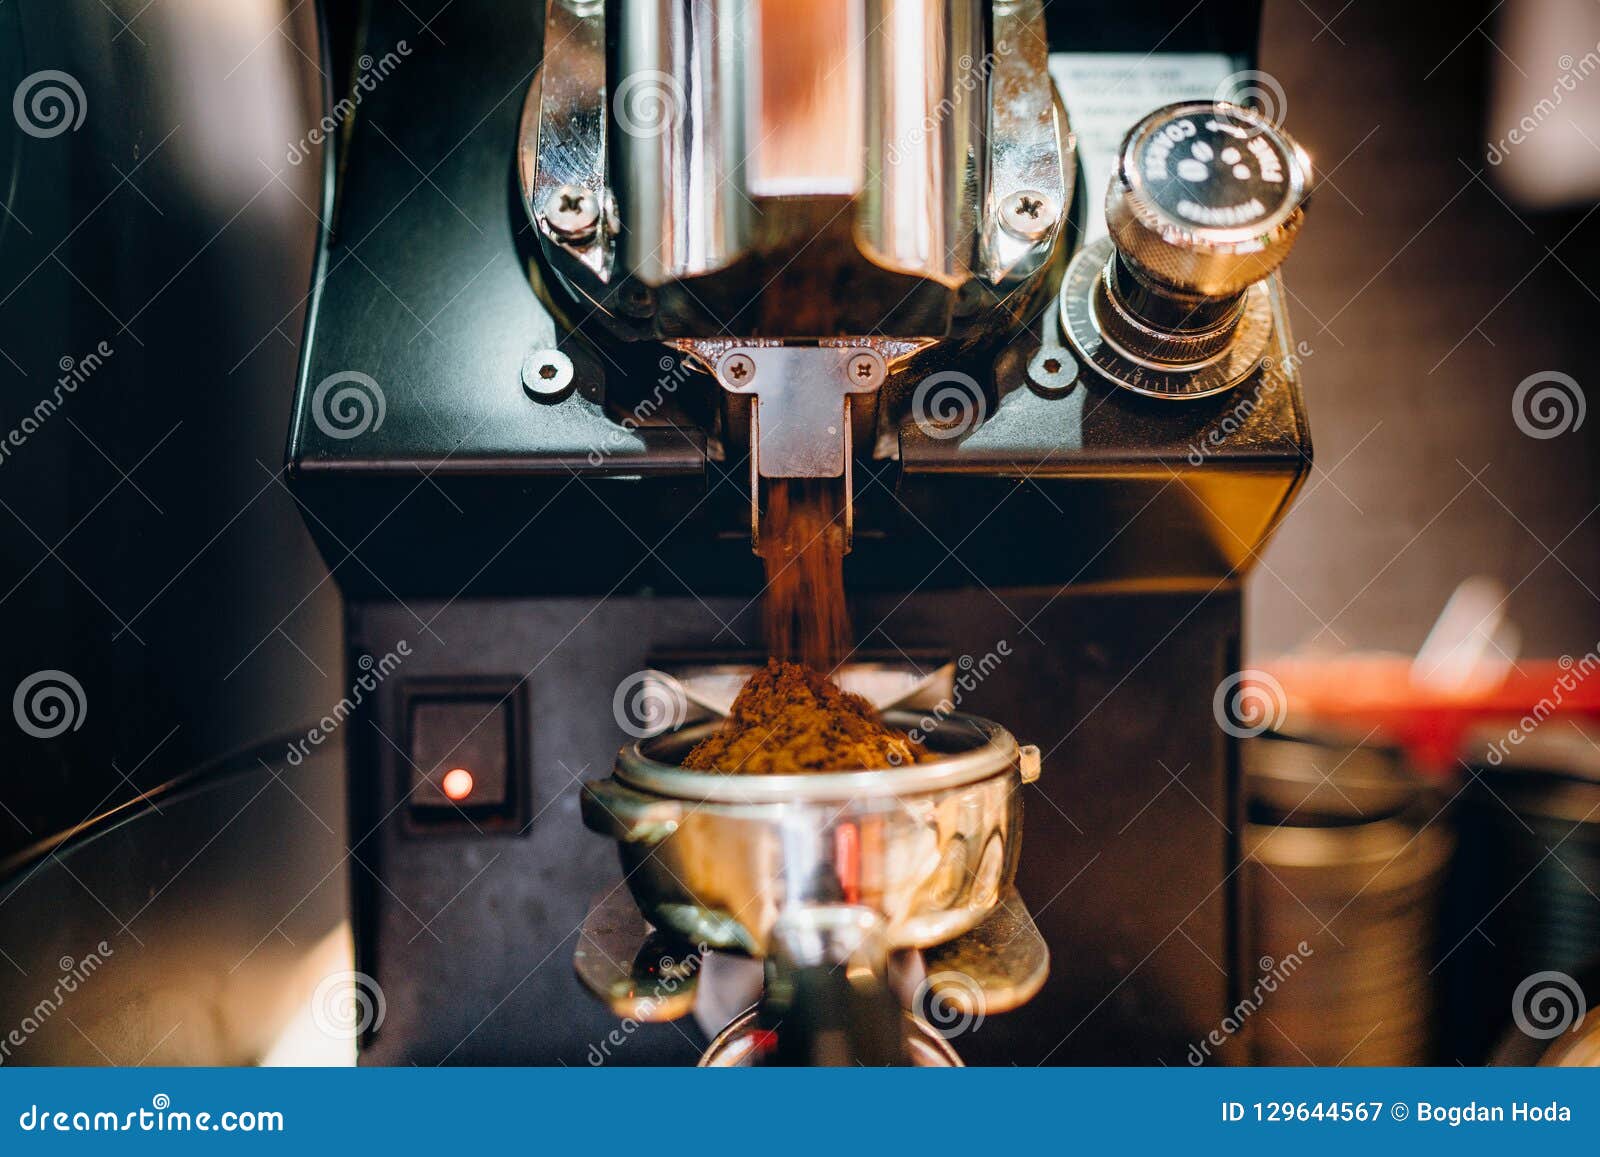 espresso preparation details - coffee being grinded into the portafilter